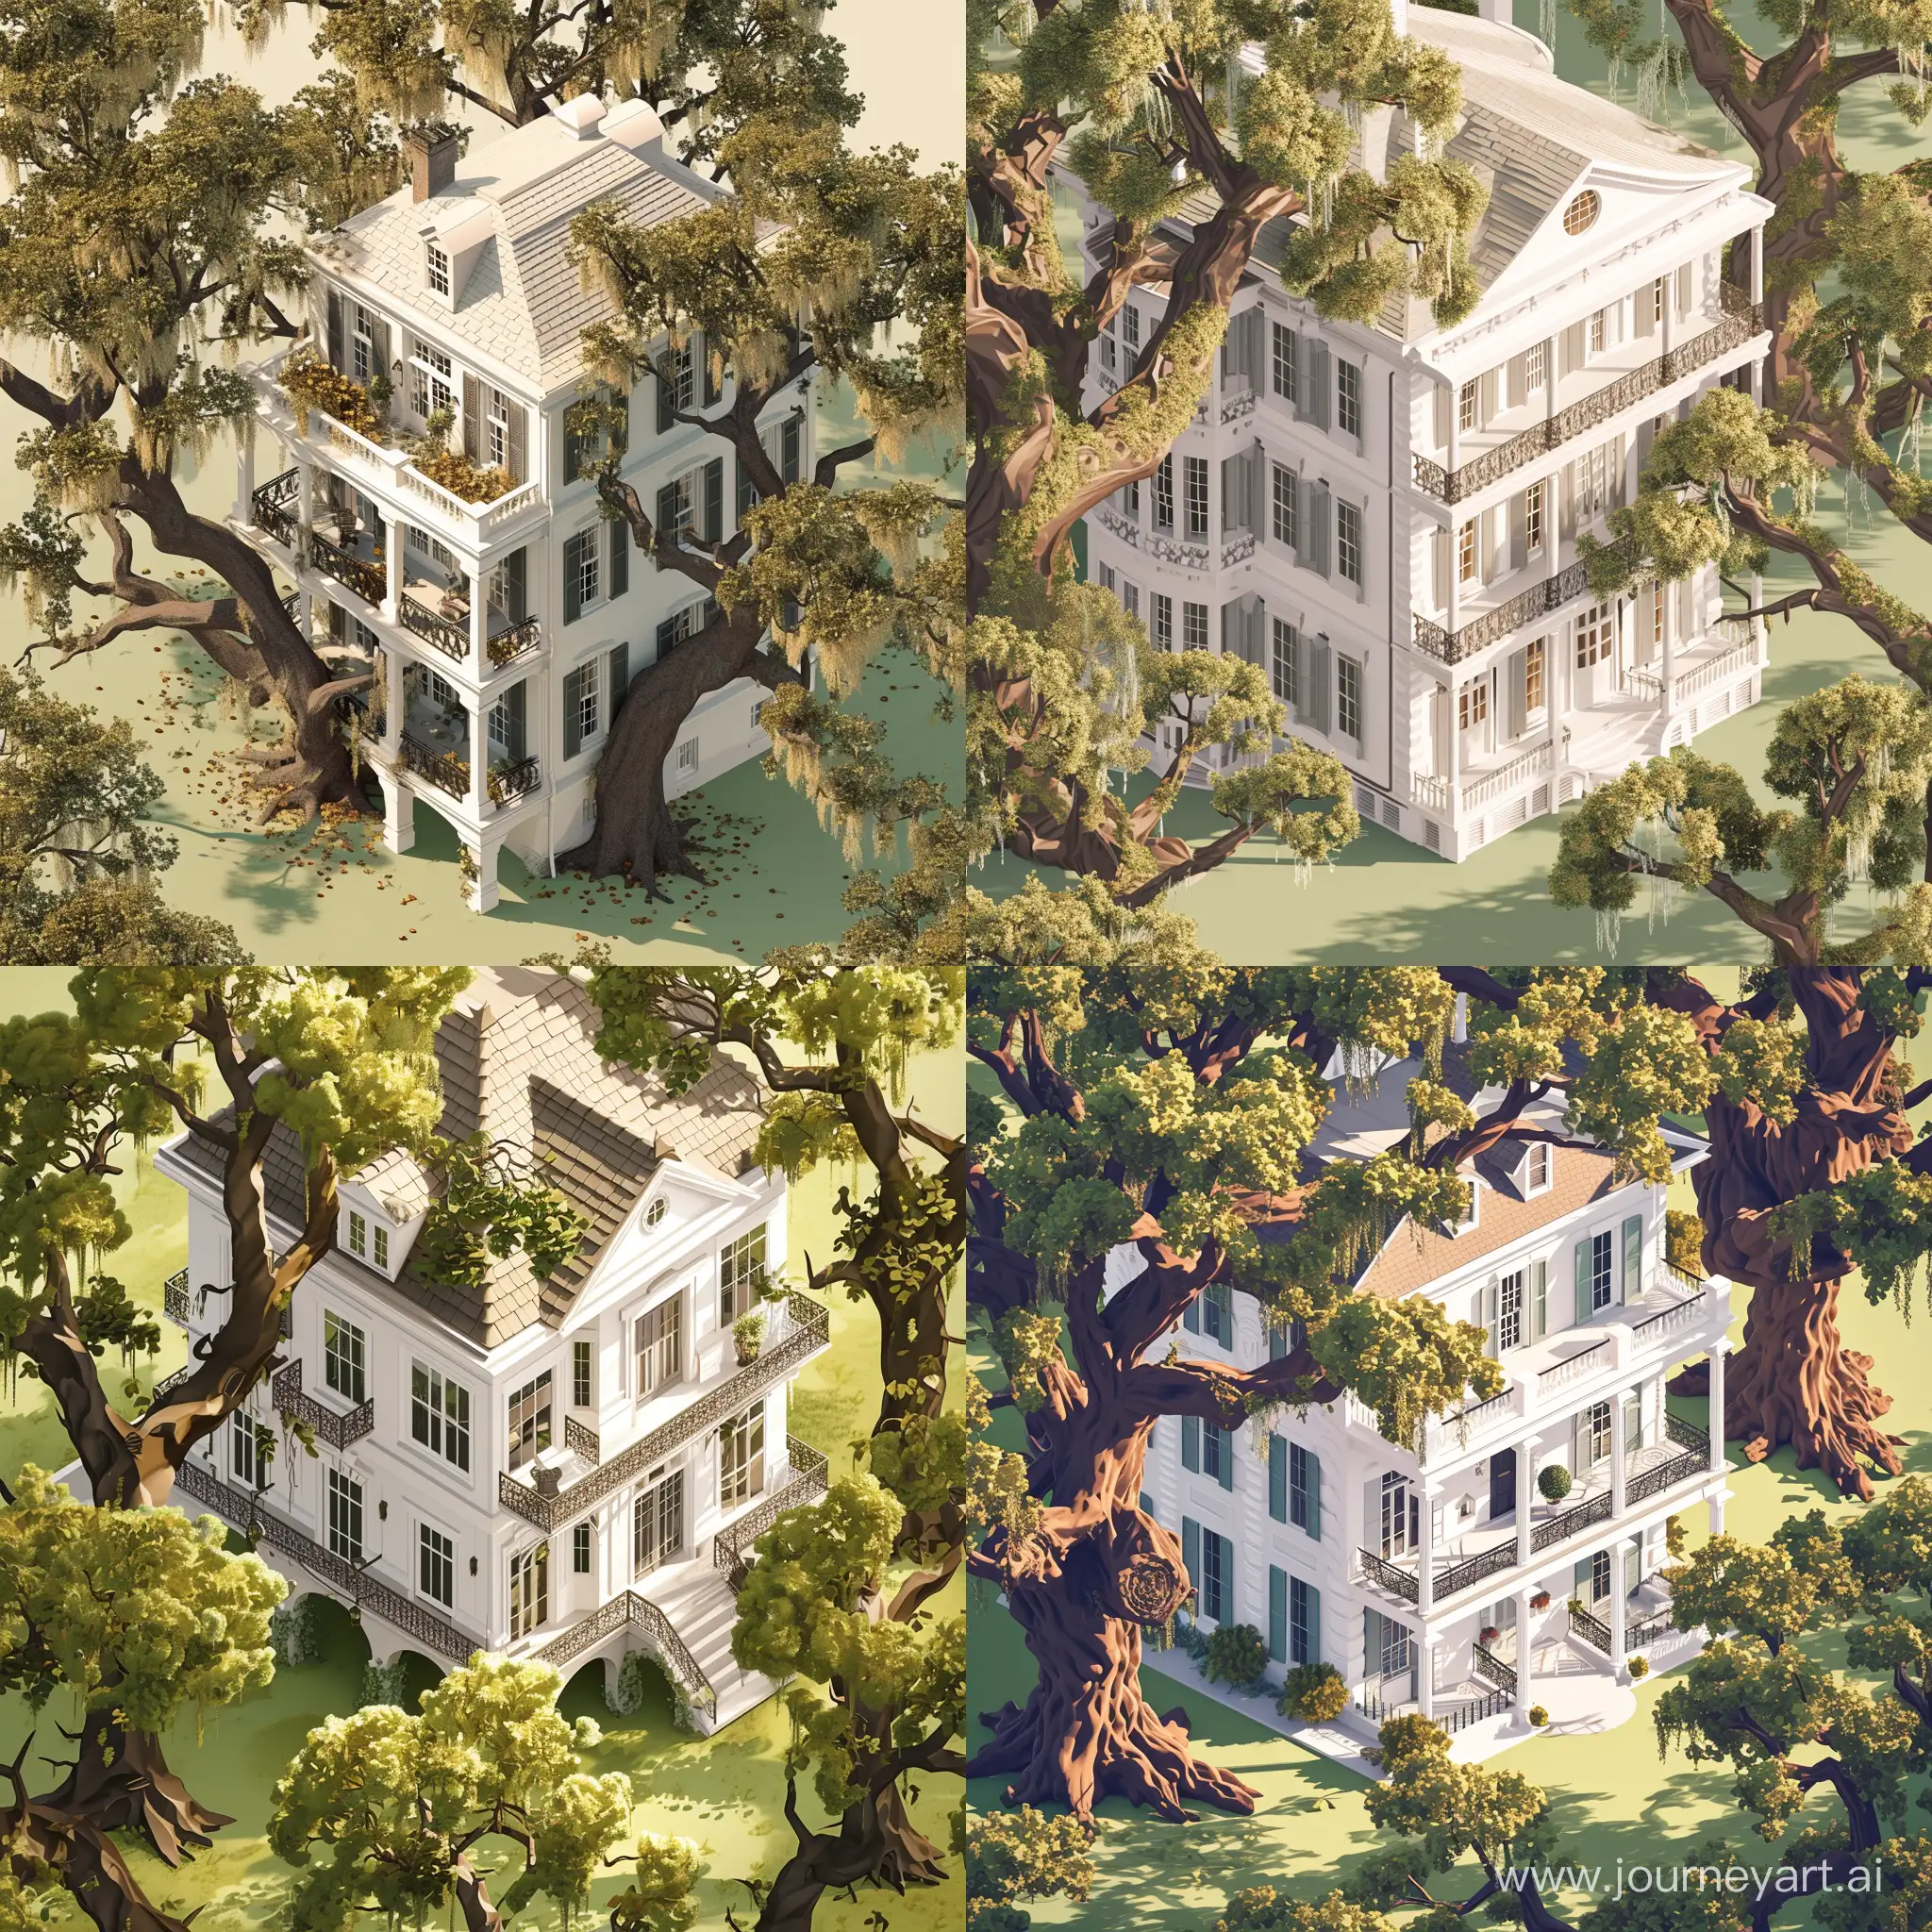 3D isometric illustration of a historic two-story house from Savannah, Georgia, featuring white exterior walls, French windows, and distinctive Southern architectural details such as decorative wrought iron railings and a shingled hip roof. The house should be enveloped by ancient live oak trees adorned with Spanish moss, their extensive branches creating a play of light and shadow over the structure and the pristine lawn around it. The scene is set in the tranquil late afternoon with a soft, golden light typical of the South. A gentle breeze should be suggested, with leaves and Spanish moss lightly stirred. The isometric perspective offers a three-quarter view from above the front right side, displaying the balconies and the live oaks' full splendor in equal measure. Render the image in a style reminiscent of a watercolor painting, with soft edges and a subdued palette of natural greens, browns, and whites, to reflect the peaceful, welcoming atmosphere characteristic of Savannah. Place the house off-center in a 1:1 square aspect ratio, creating a balanced composition that emphasizes both the historic home and its lush, natural setting.